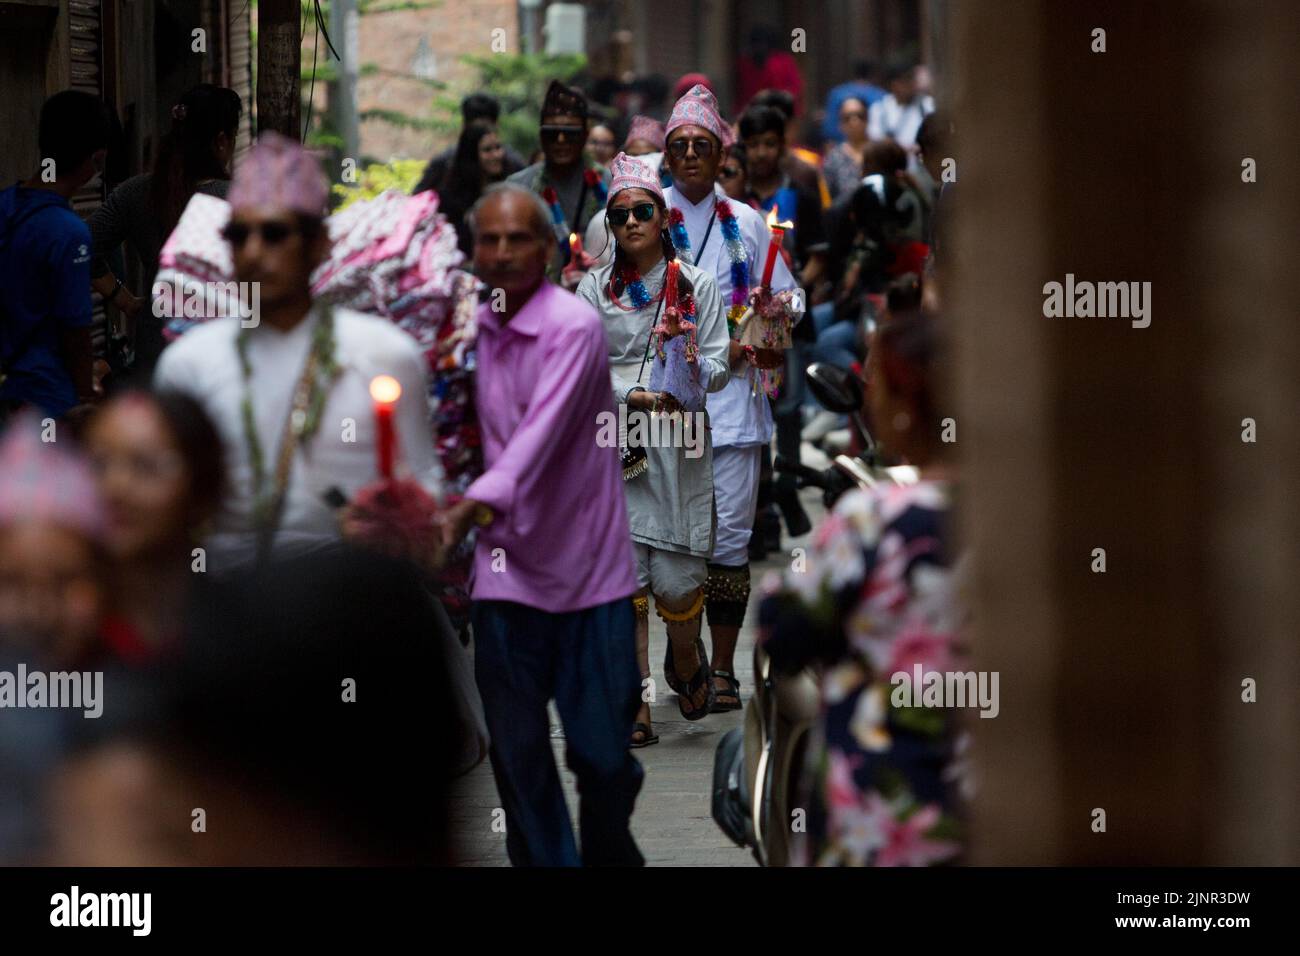 Lalitpur, Nepal. 13th Aug, 2022. People participate in a parade commemorating the Mataya festival, or the festival of lights, in Lalitpur, Nepal, Aug. 13, 2022. Credit: Sulav Shrestha/Xinhua/Alamy Live News Stock Photo